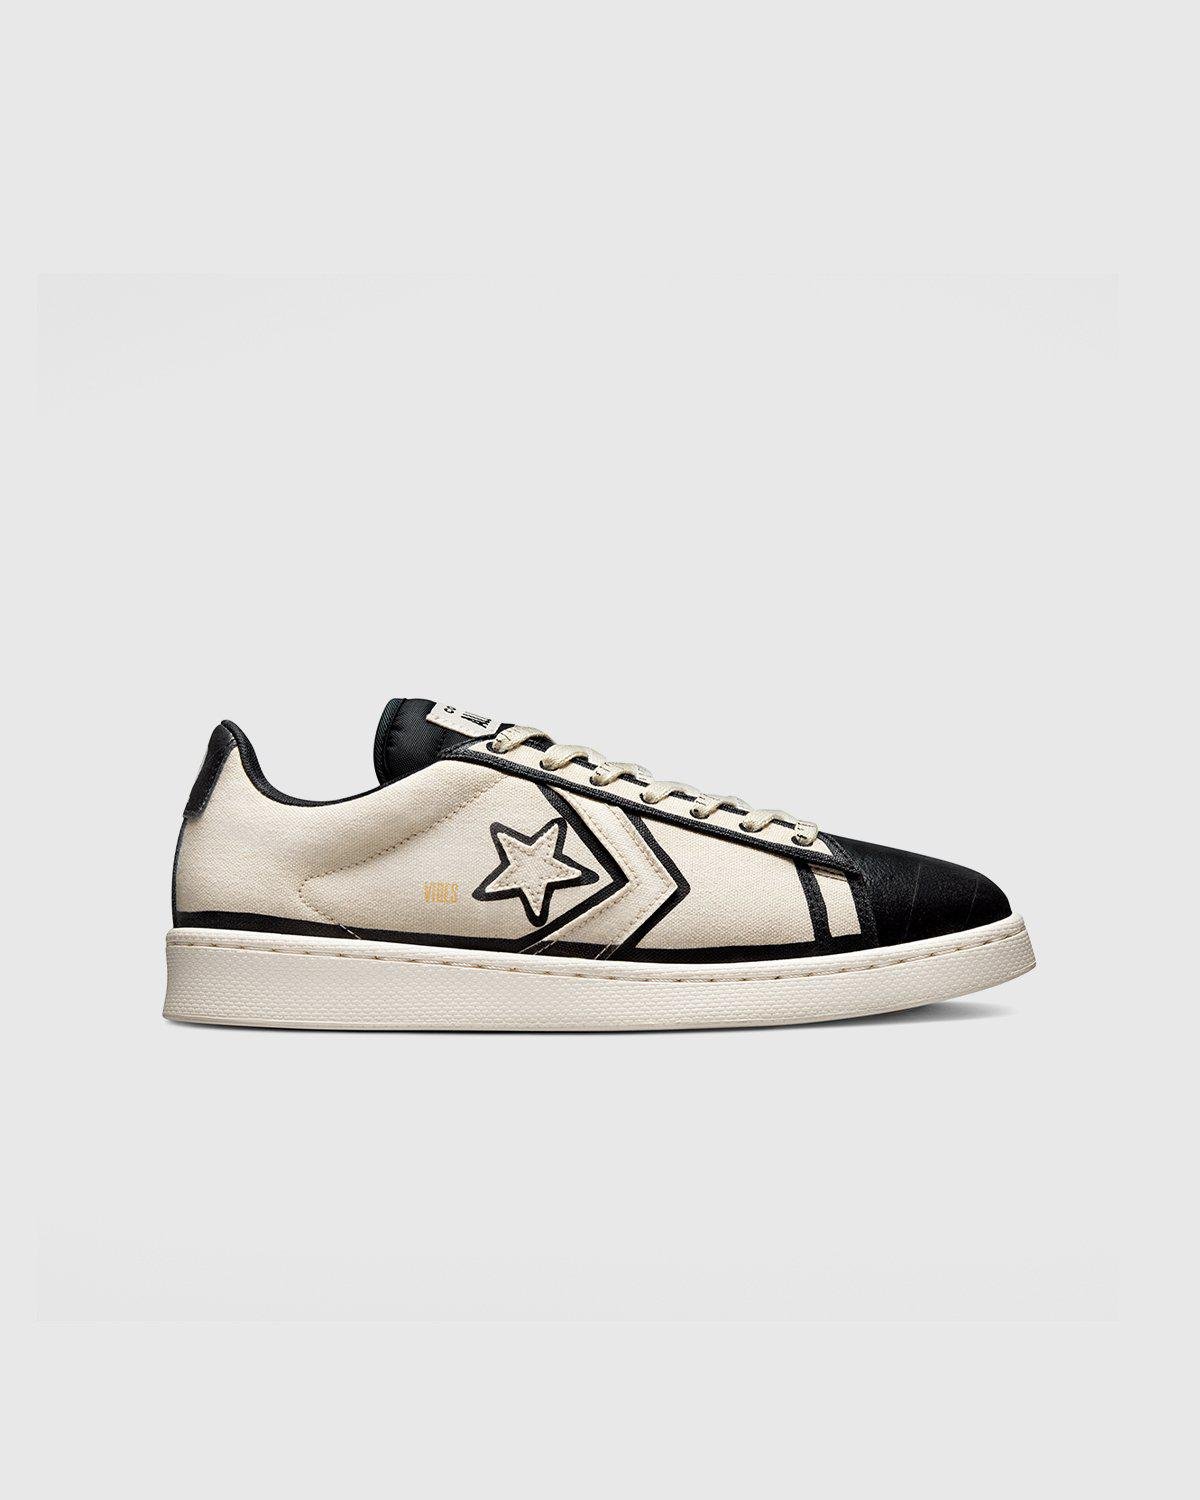 Pro Leather Ox Natural Ivory/Black/White by CONVERSE X JOSHUA VIDES